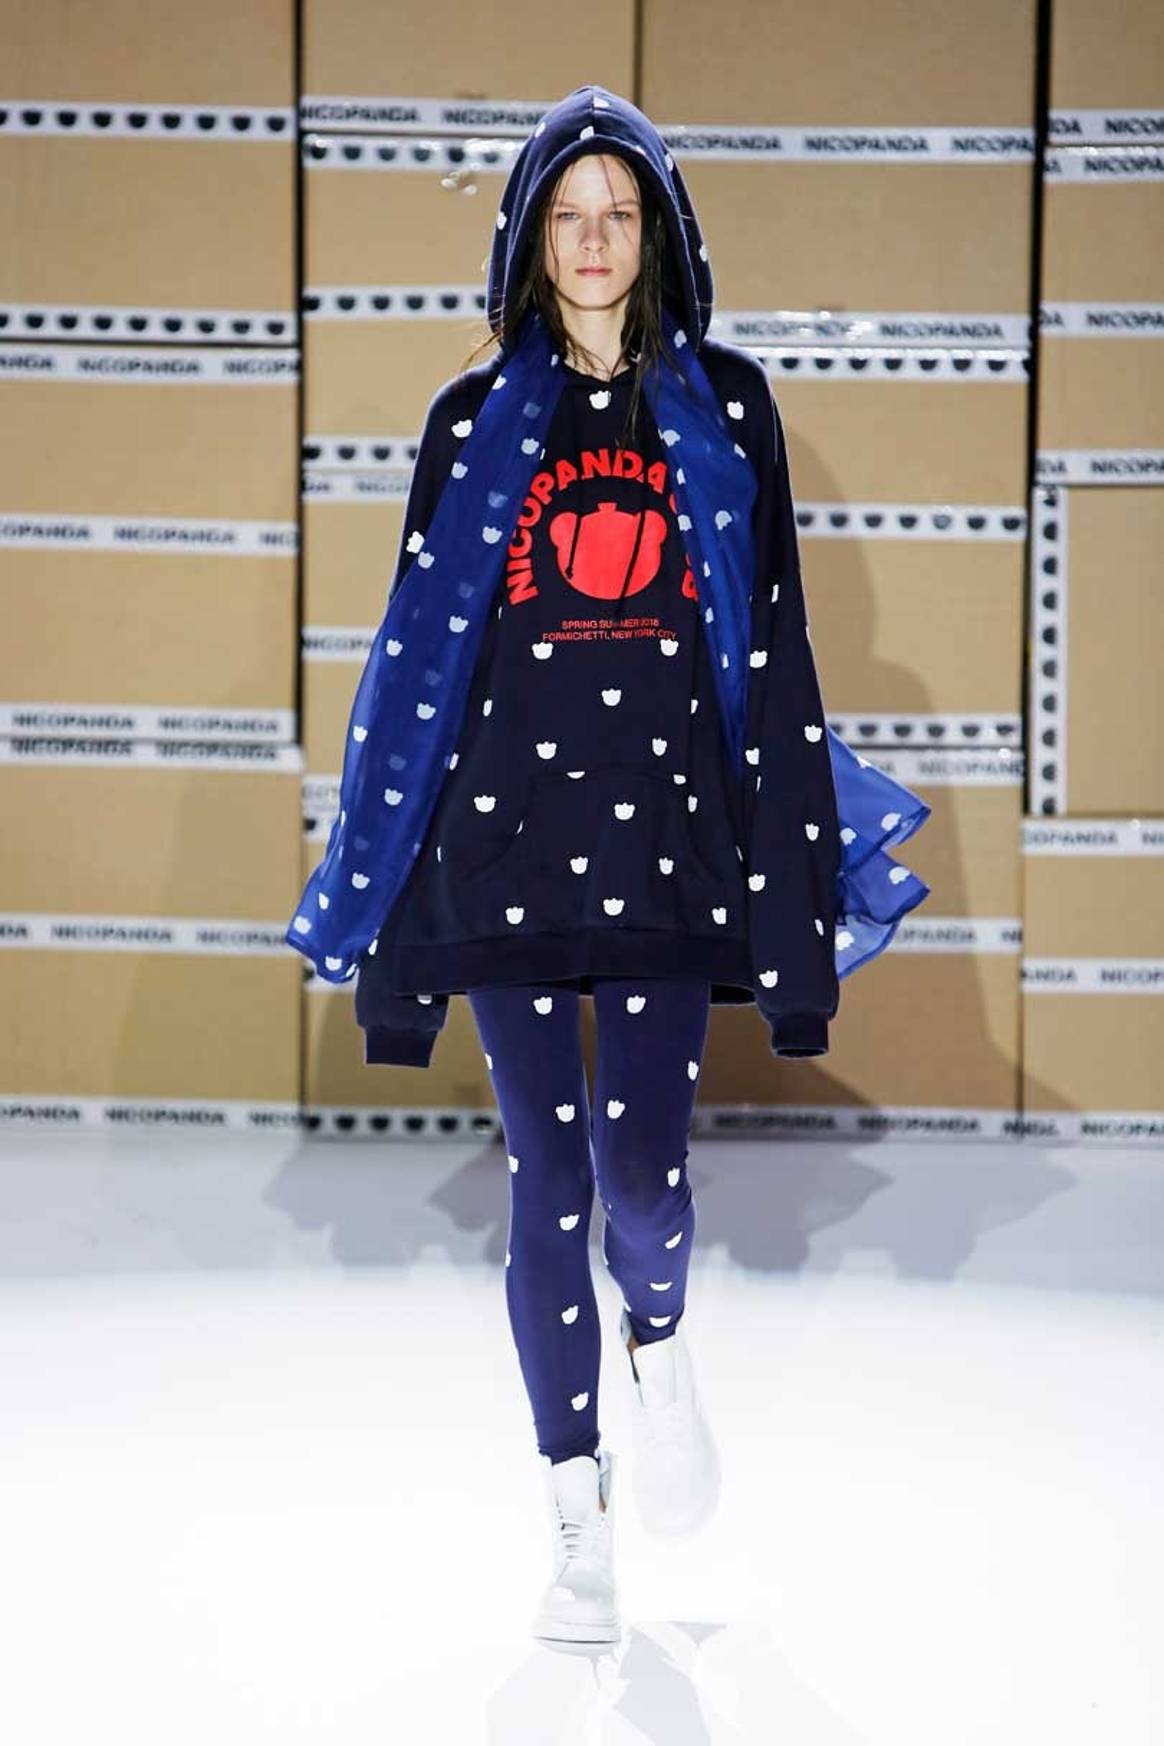 In Pictures: Nicodpanda for Amazon debuts at LFW